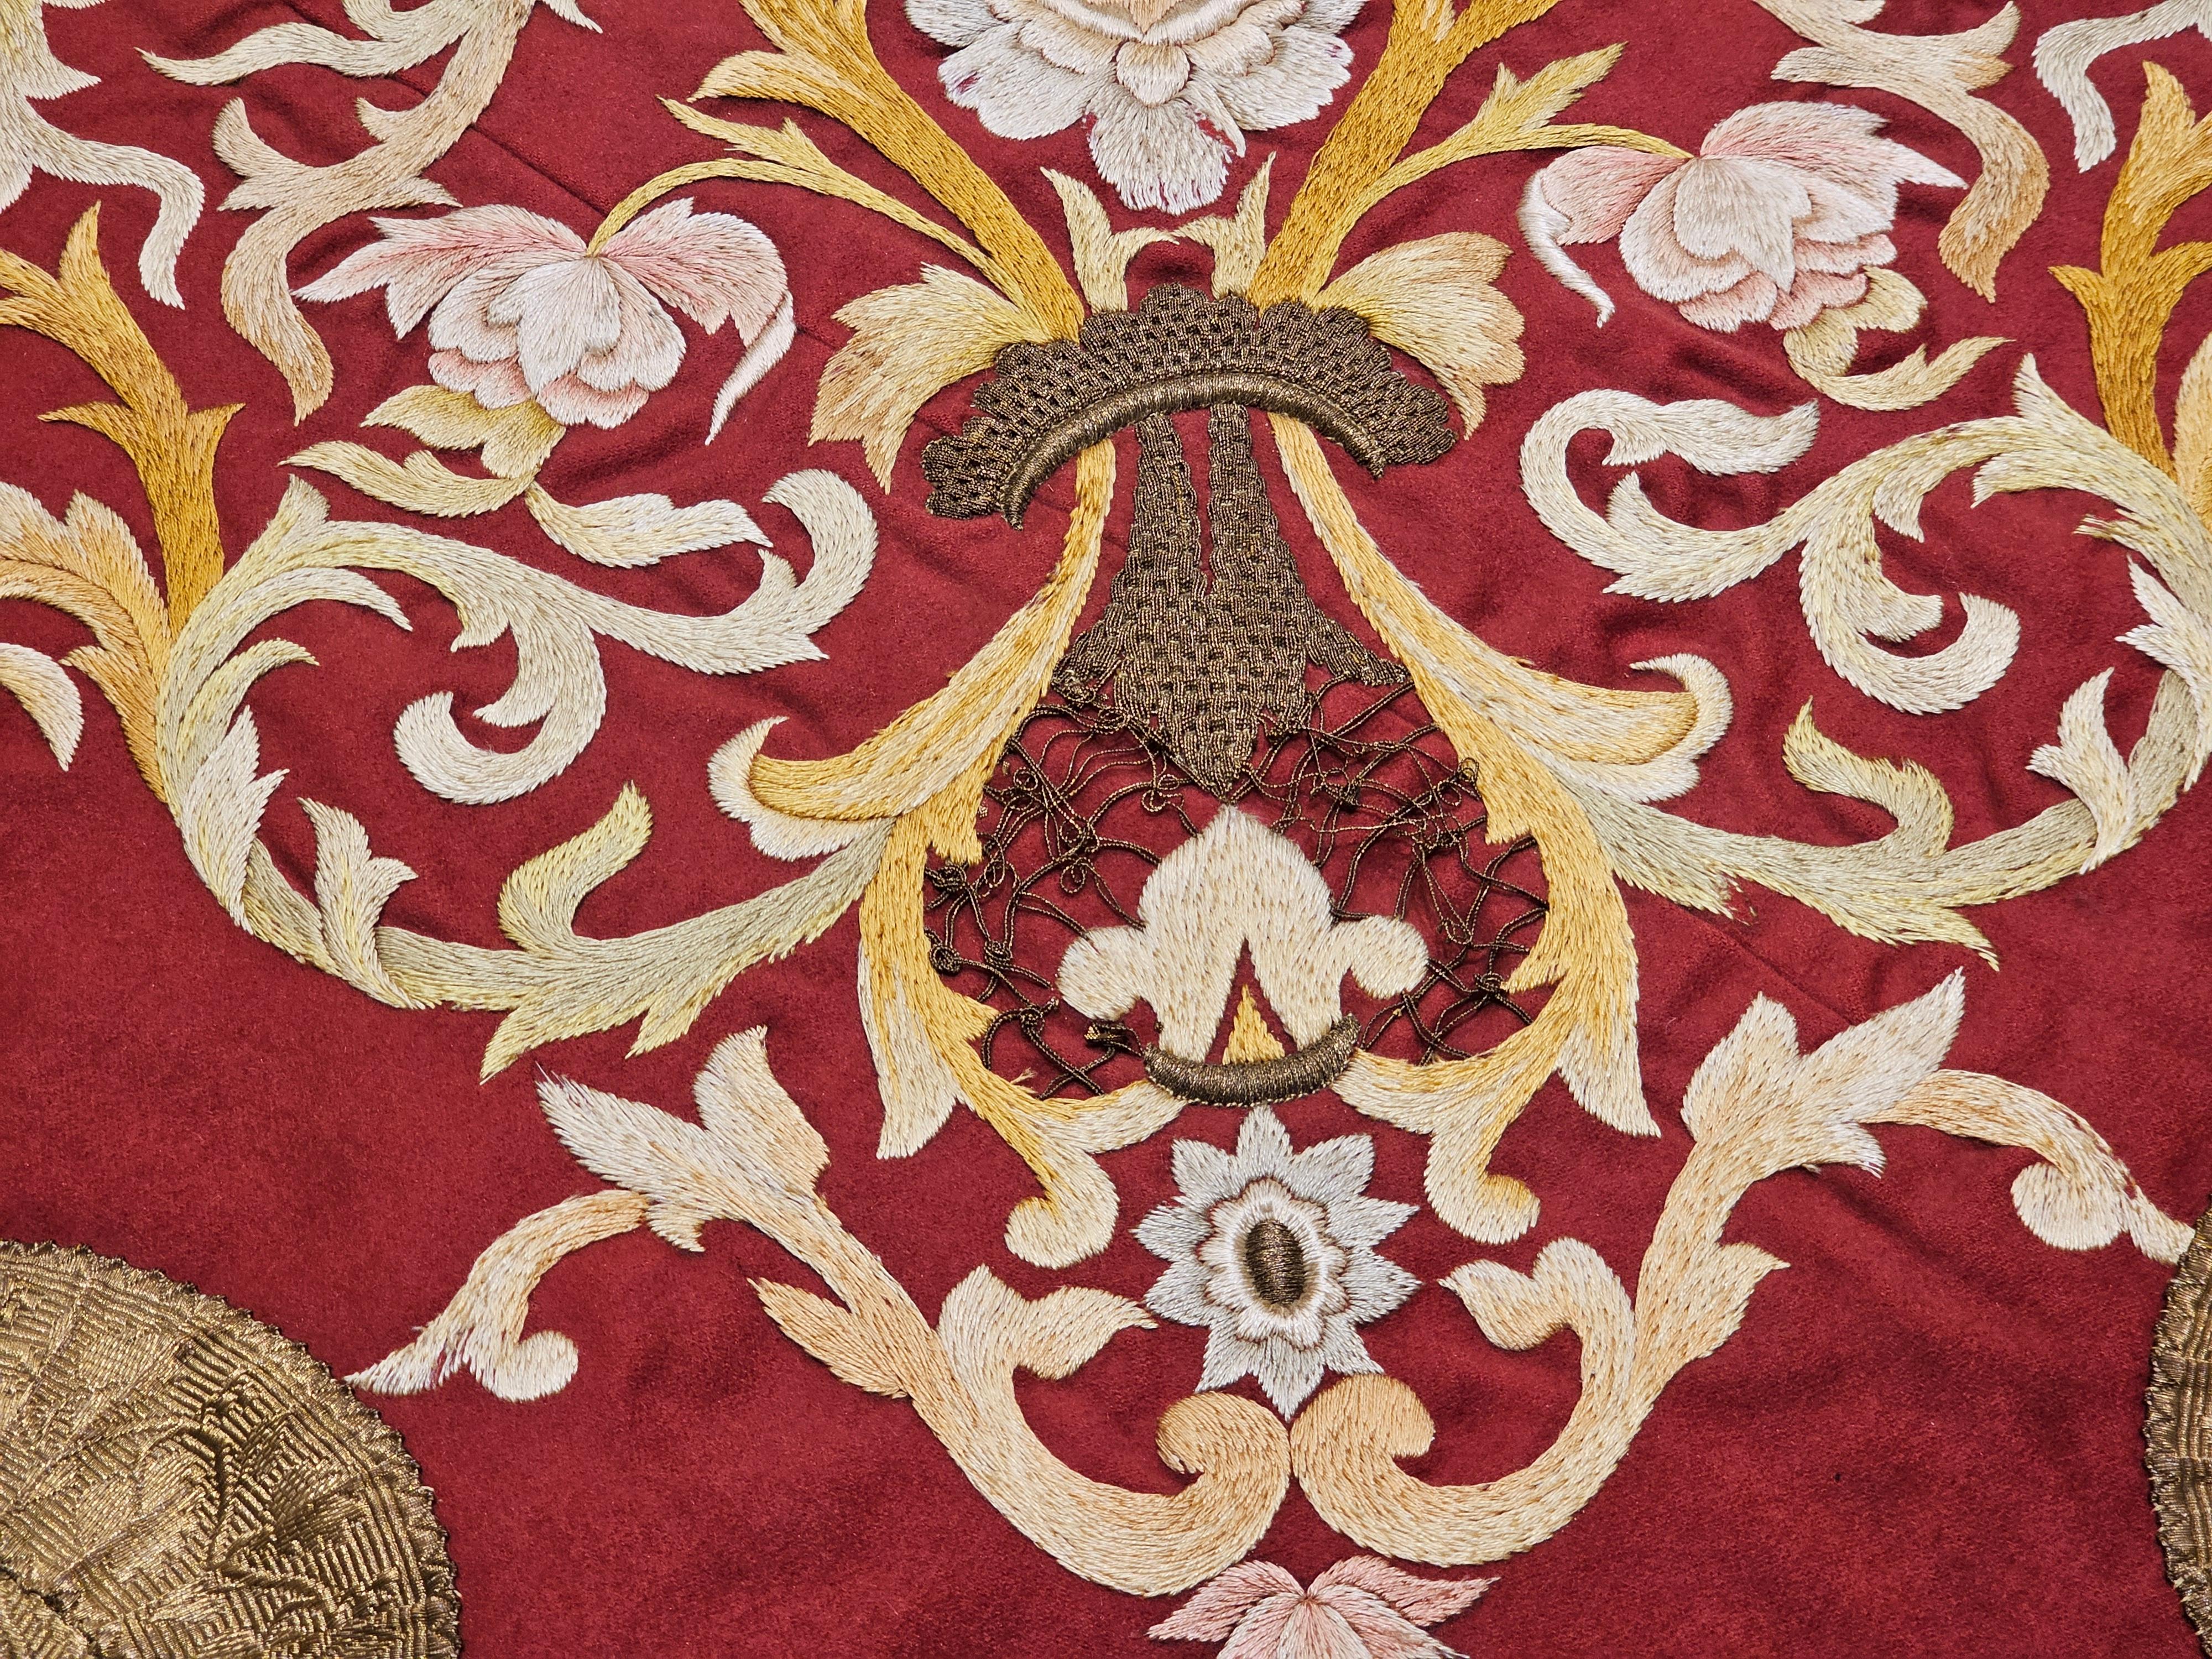 Hand-Crafted 19th Century Ottoman Hand Embroidered Silk and Gilt Threads Tapestry Textile For Sale